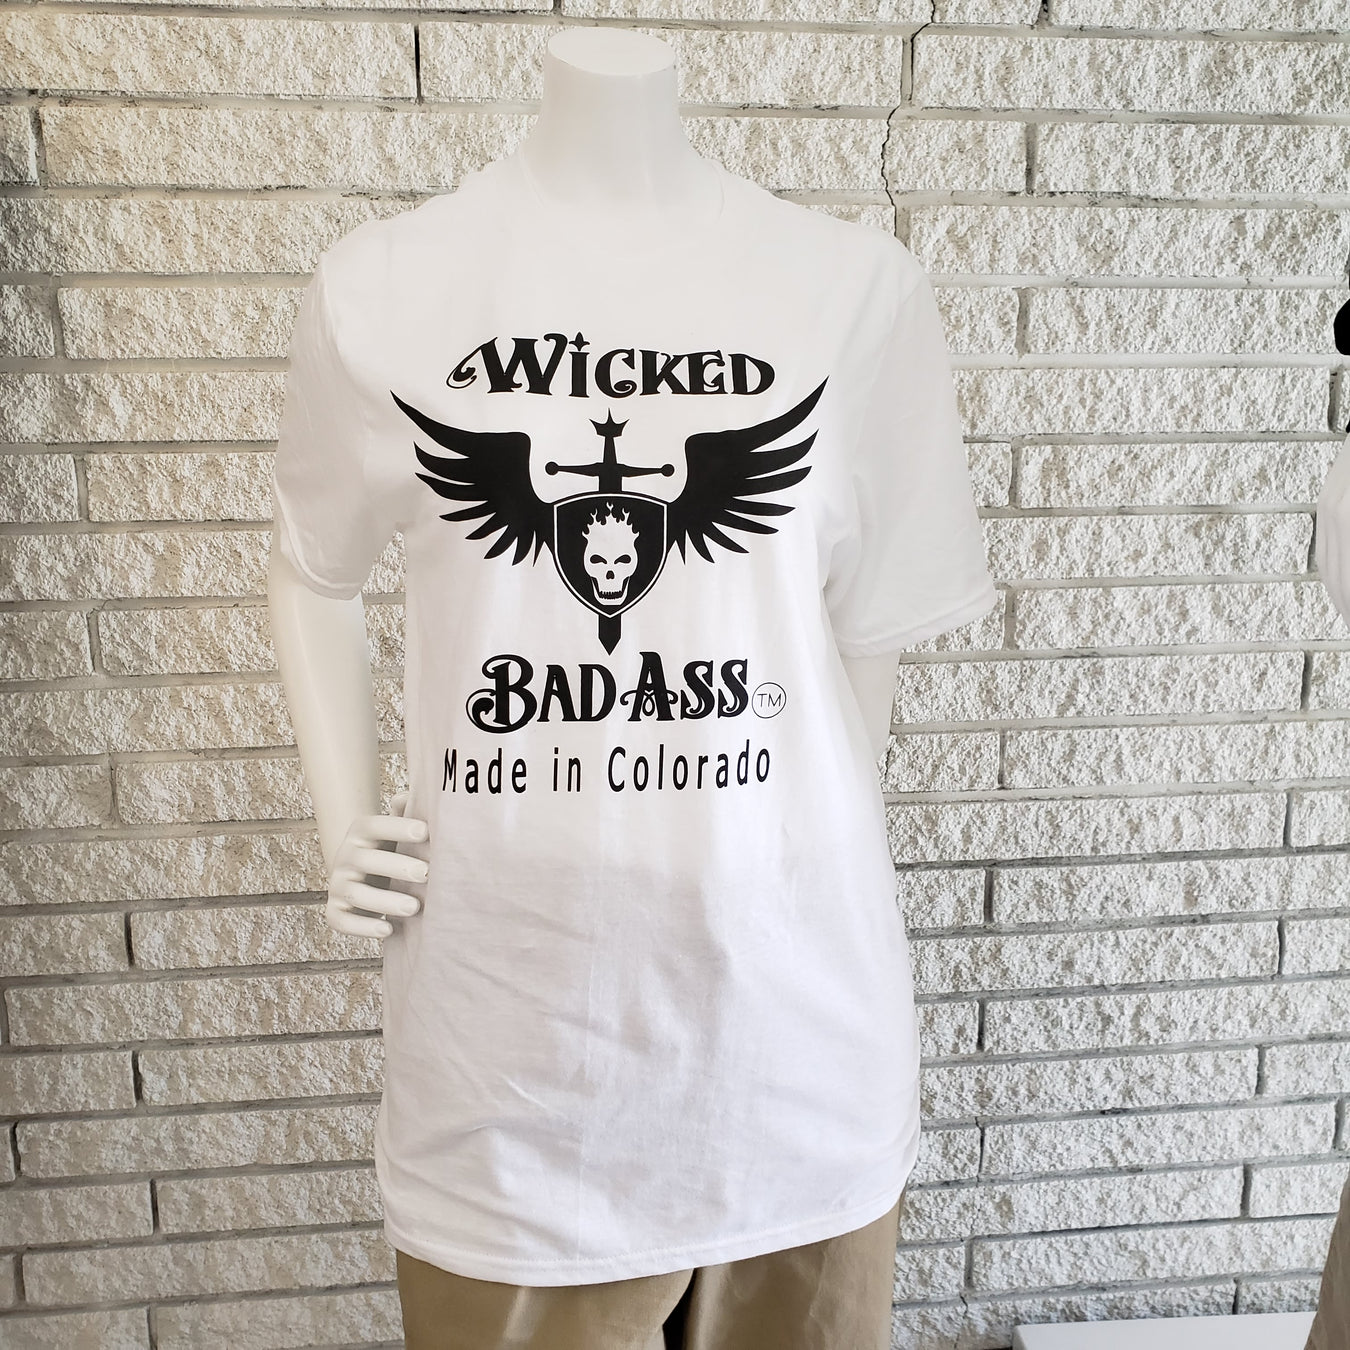 Wicked Bad Ass T-Shirts